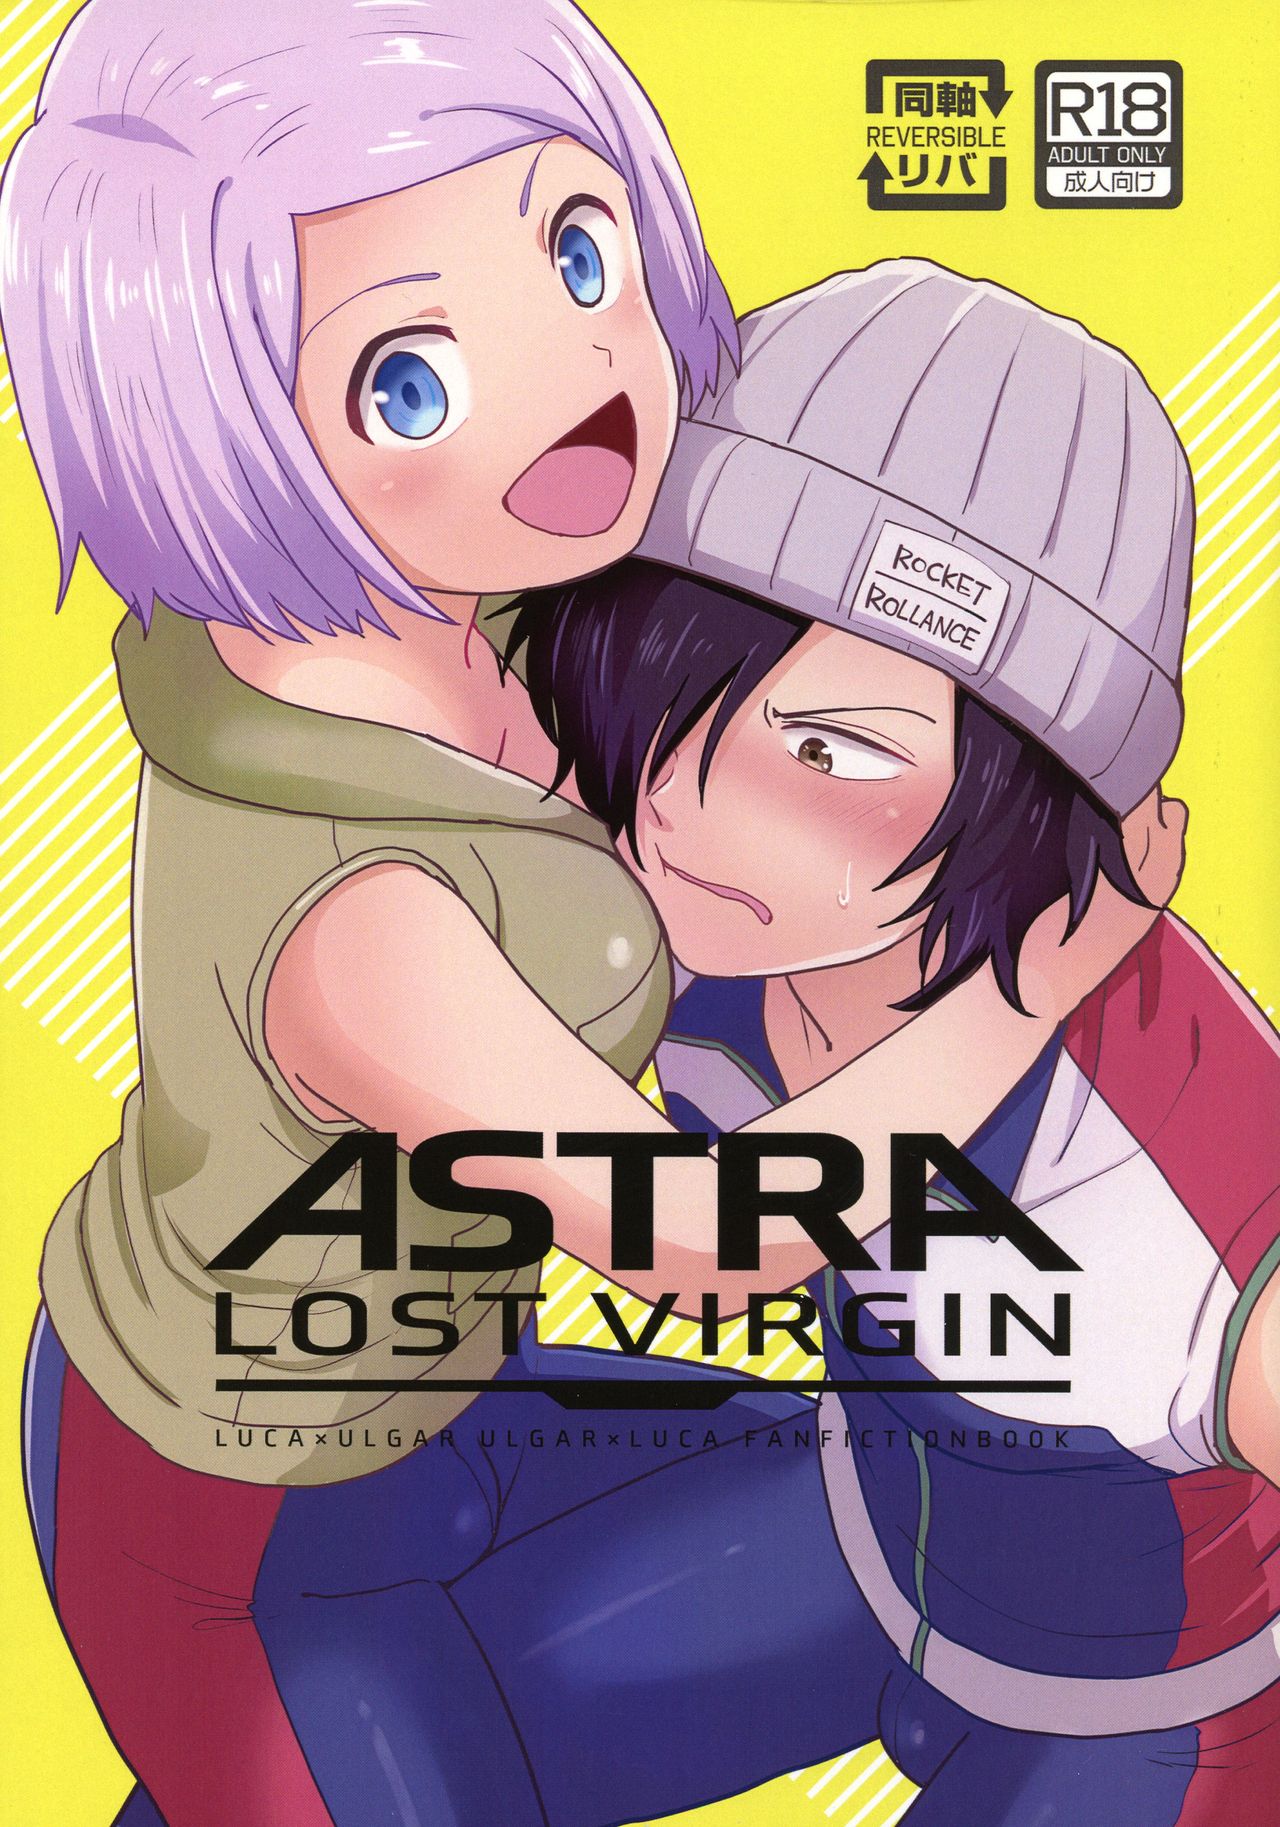 Astra lost in space porn comic